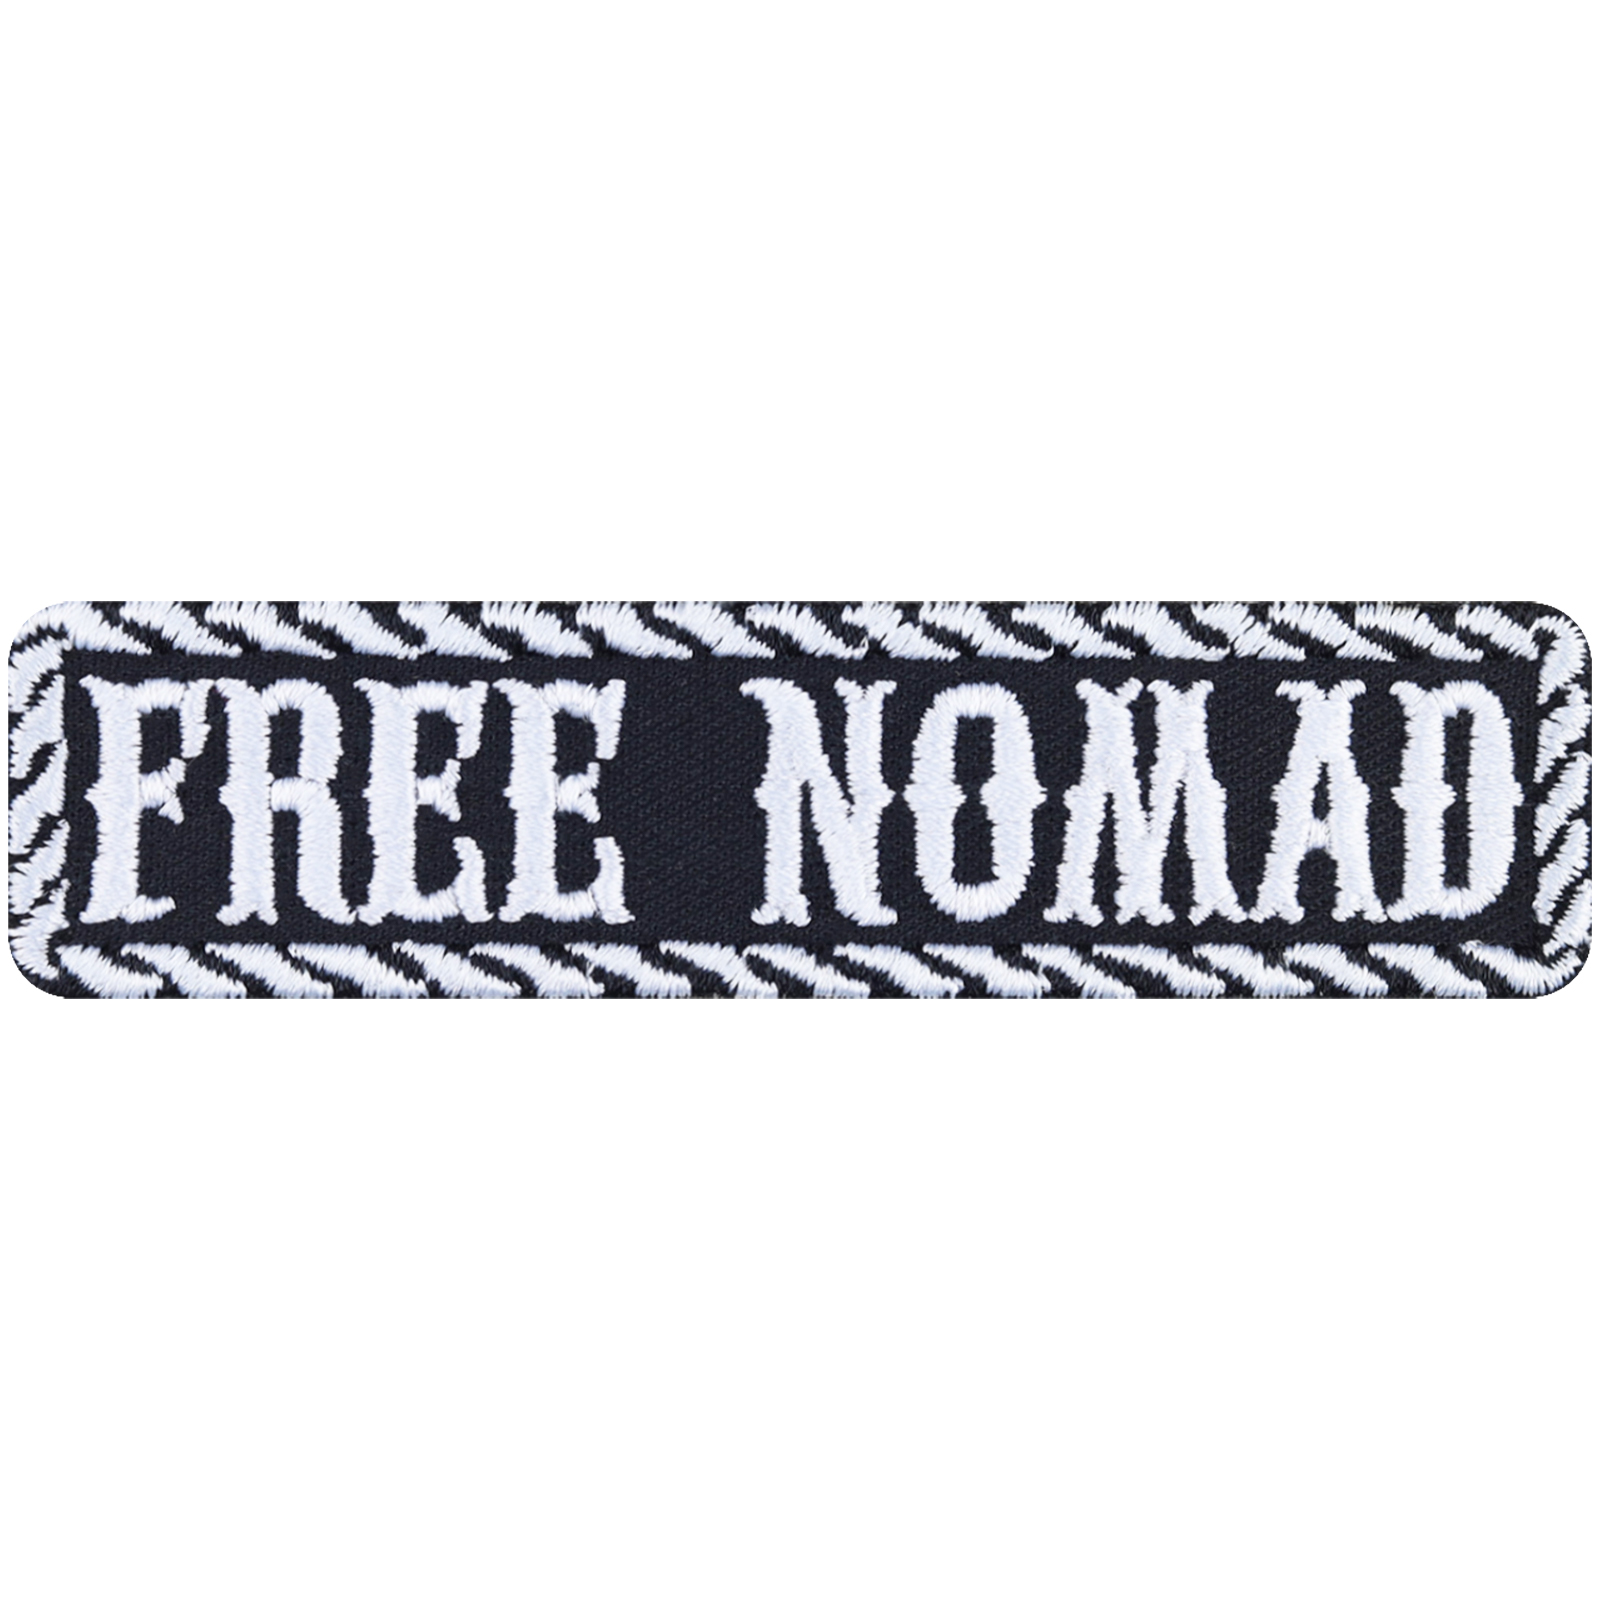 Free nomad - Patch